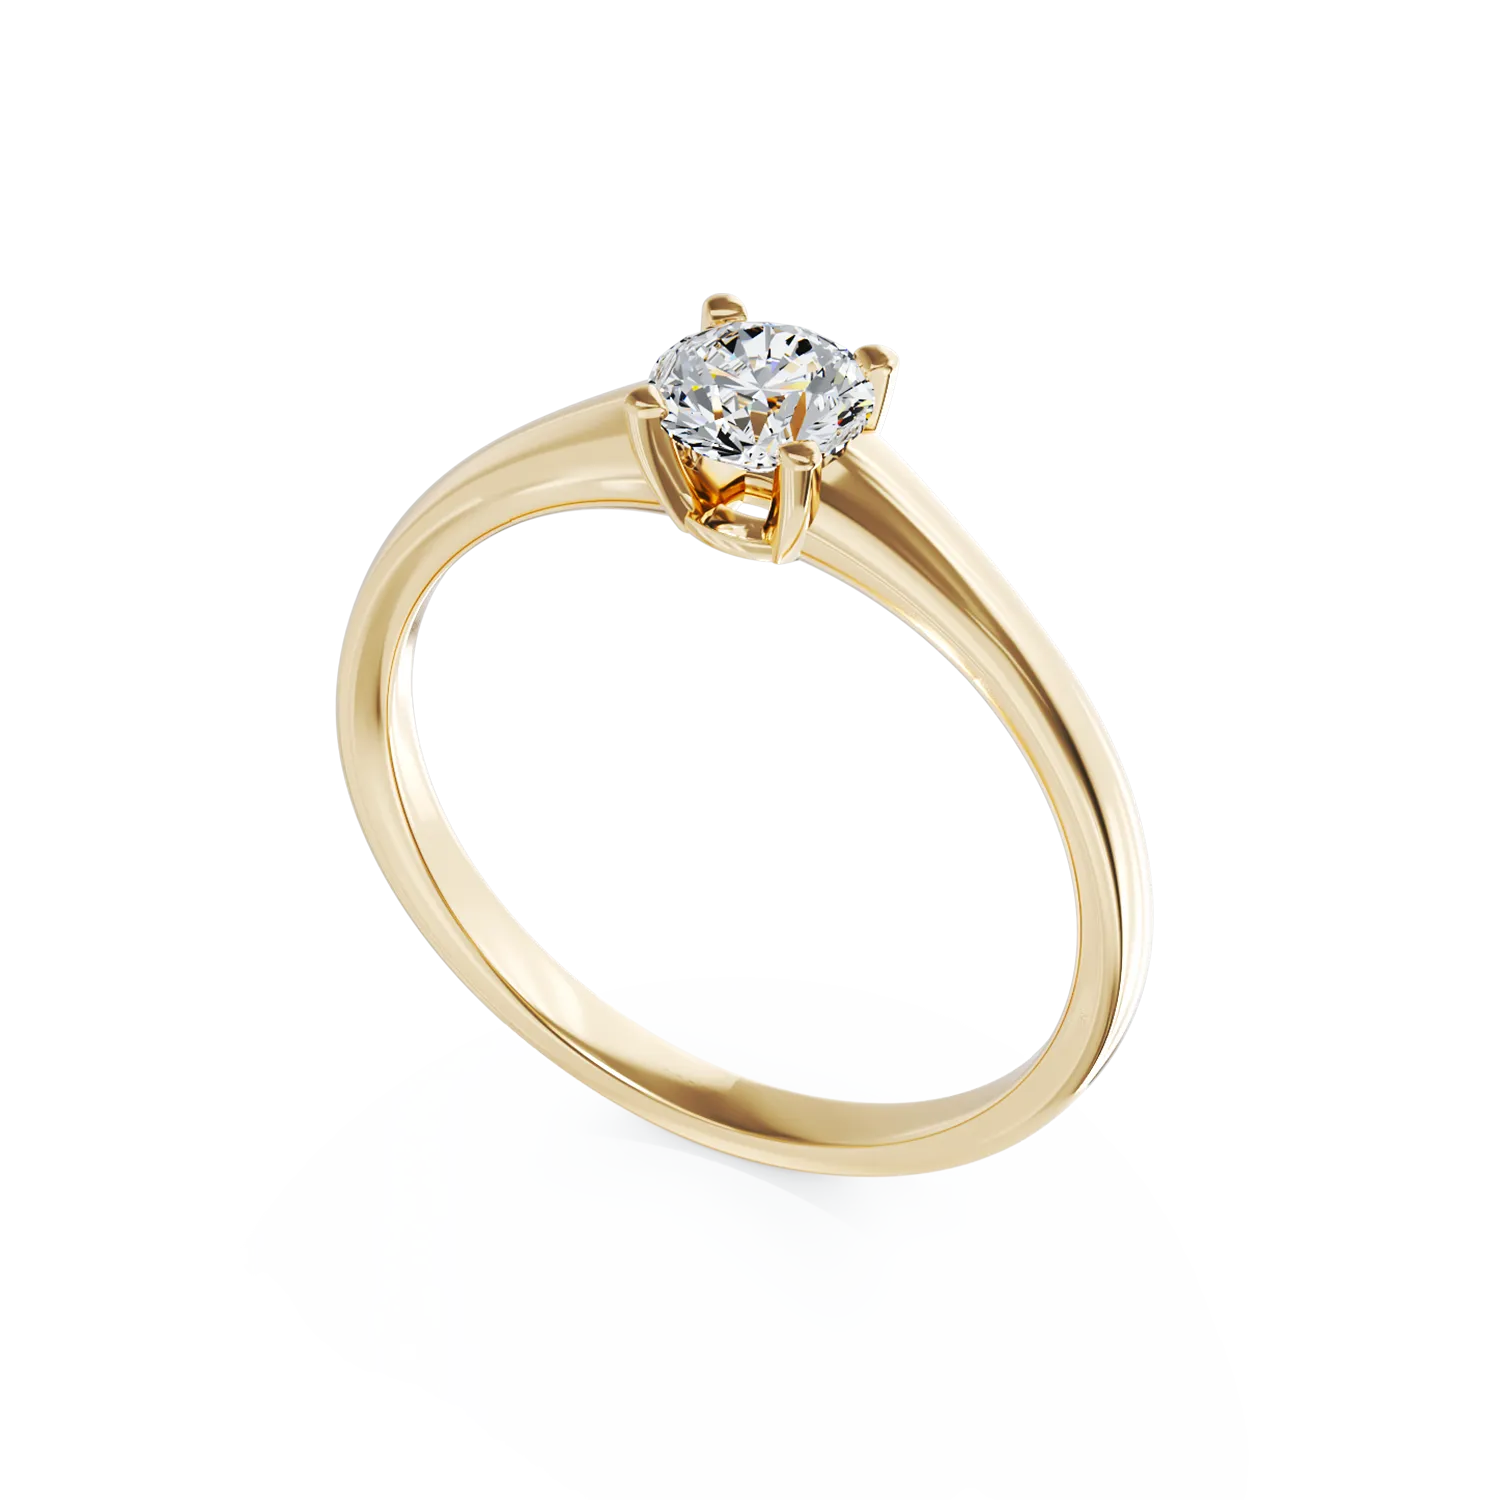 18K yellow gold engagement ring with 0.41ct solitaire diamond